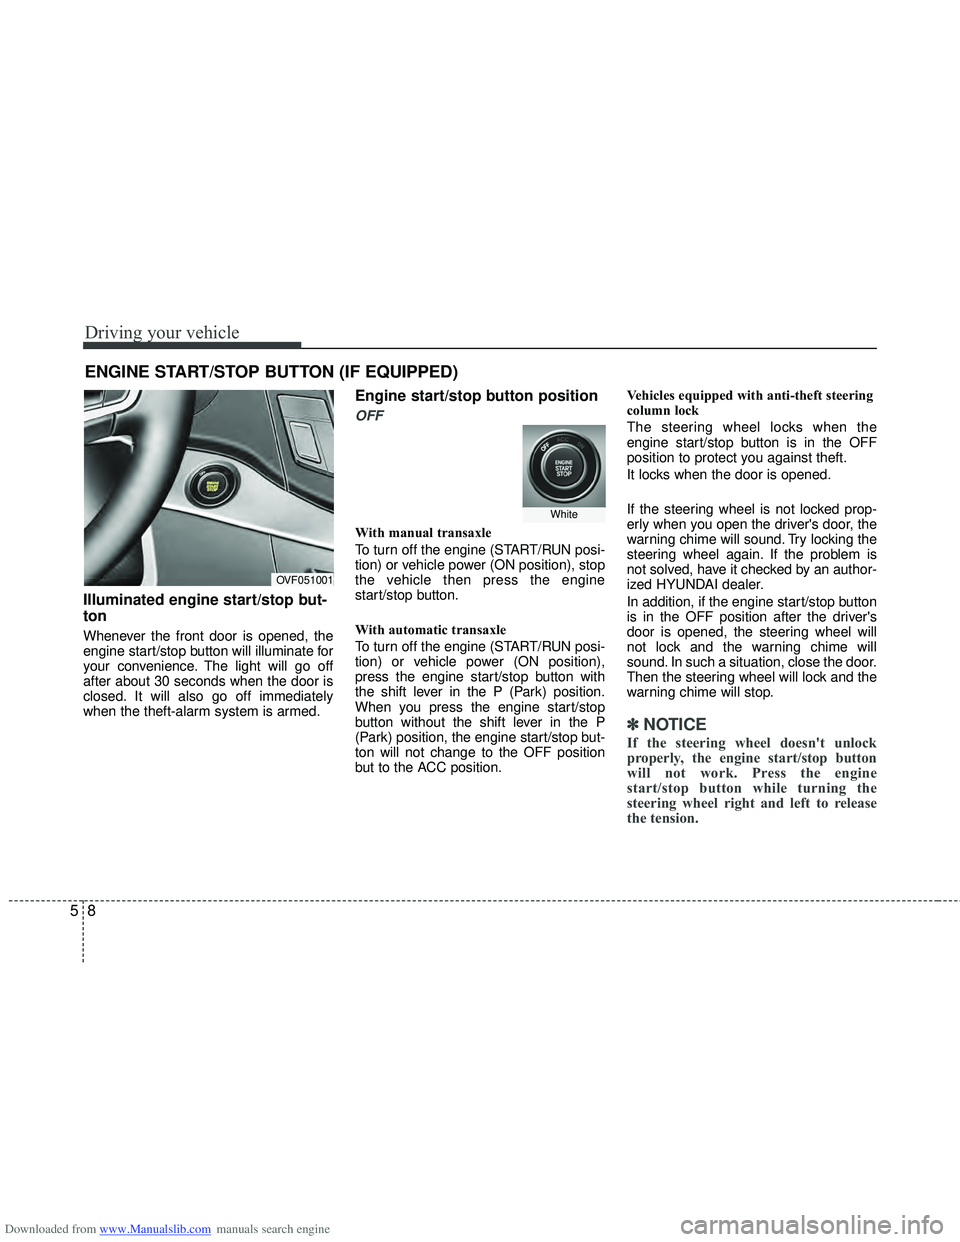 HYUNDAI I40 2016  Owners Manual Downloaded from www.Manualslib.com manuals search engine Driving your vehicle
85
ENGINE START/STOP BUTTON (IF EQUIPPED)
Illuminated engine start/stop but-
ton
Whenever the front door is opened, the
en